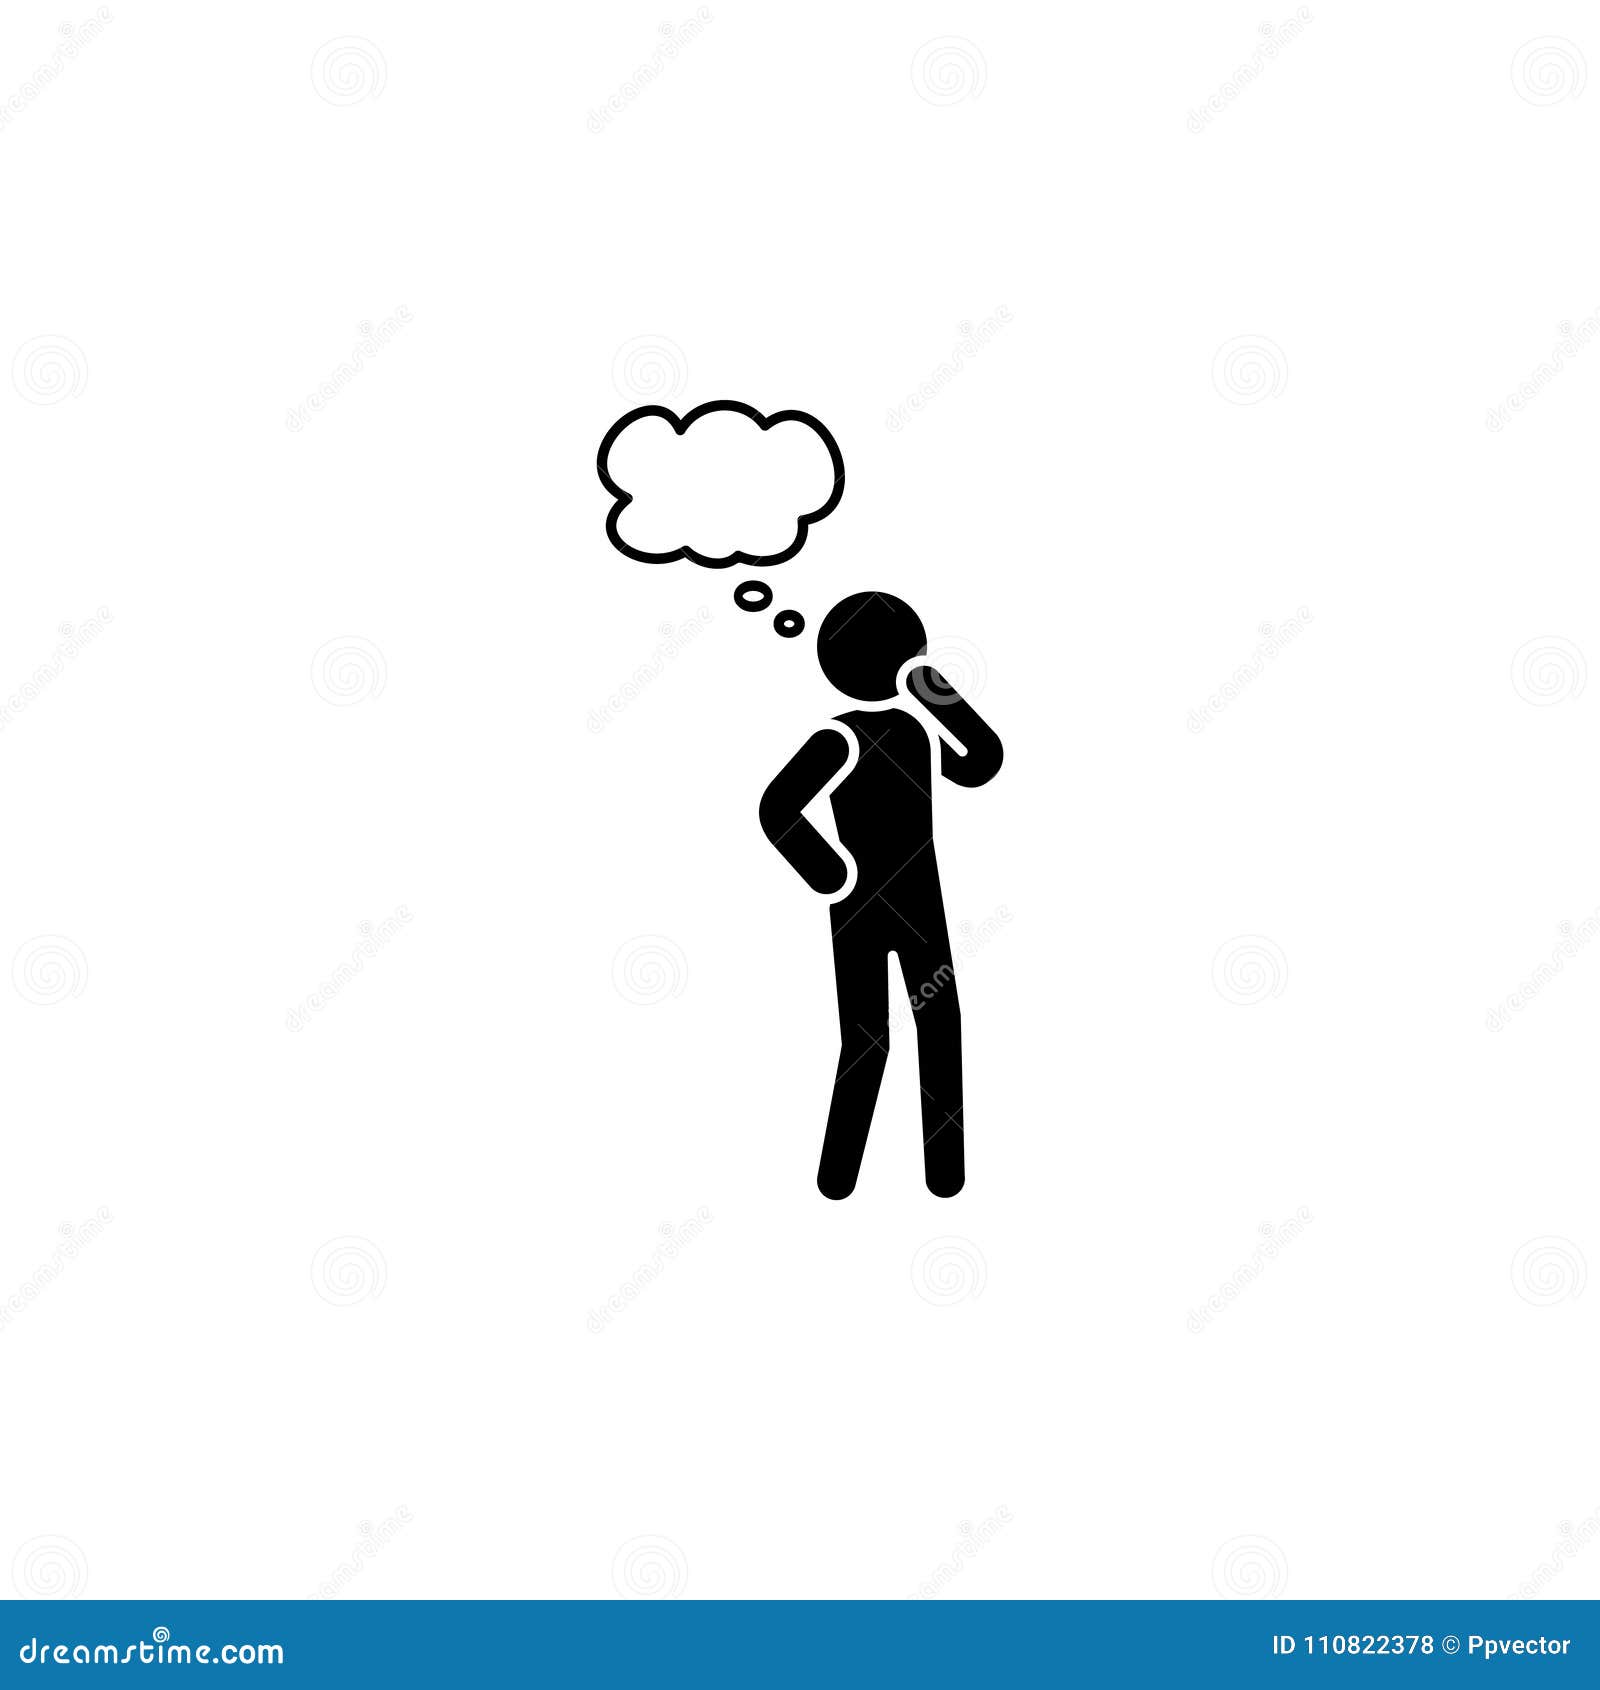 Thinking Man Icon Person Thinking Stock Vector Illustration Of Bubble Pictograph 110822378